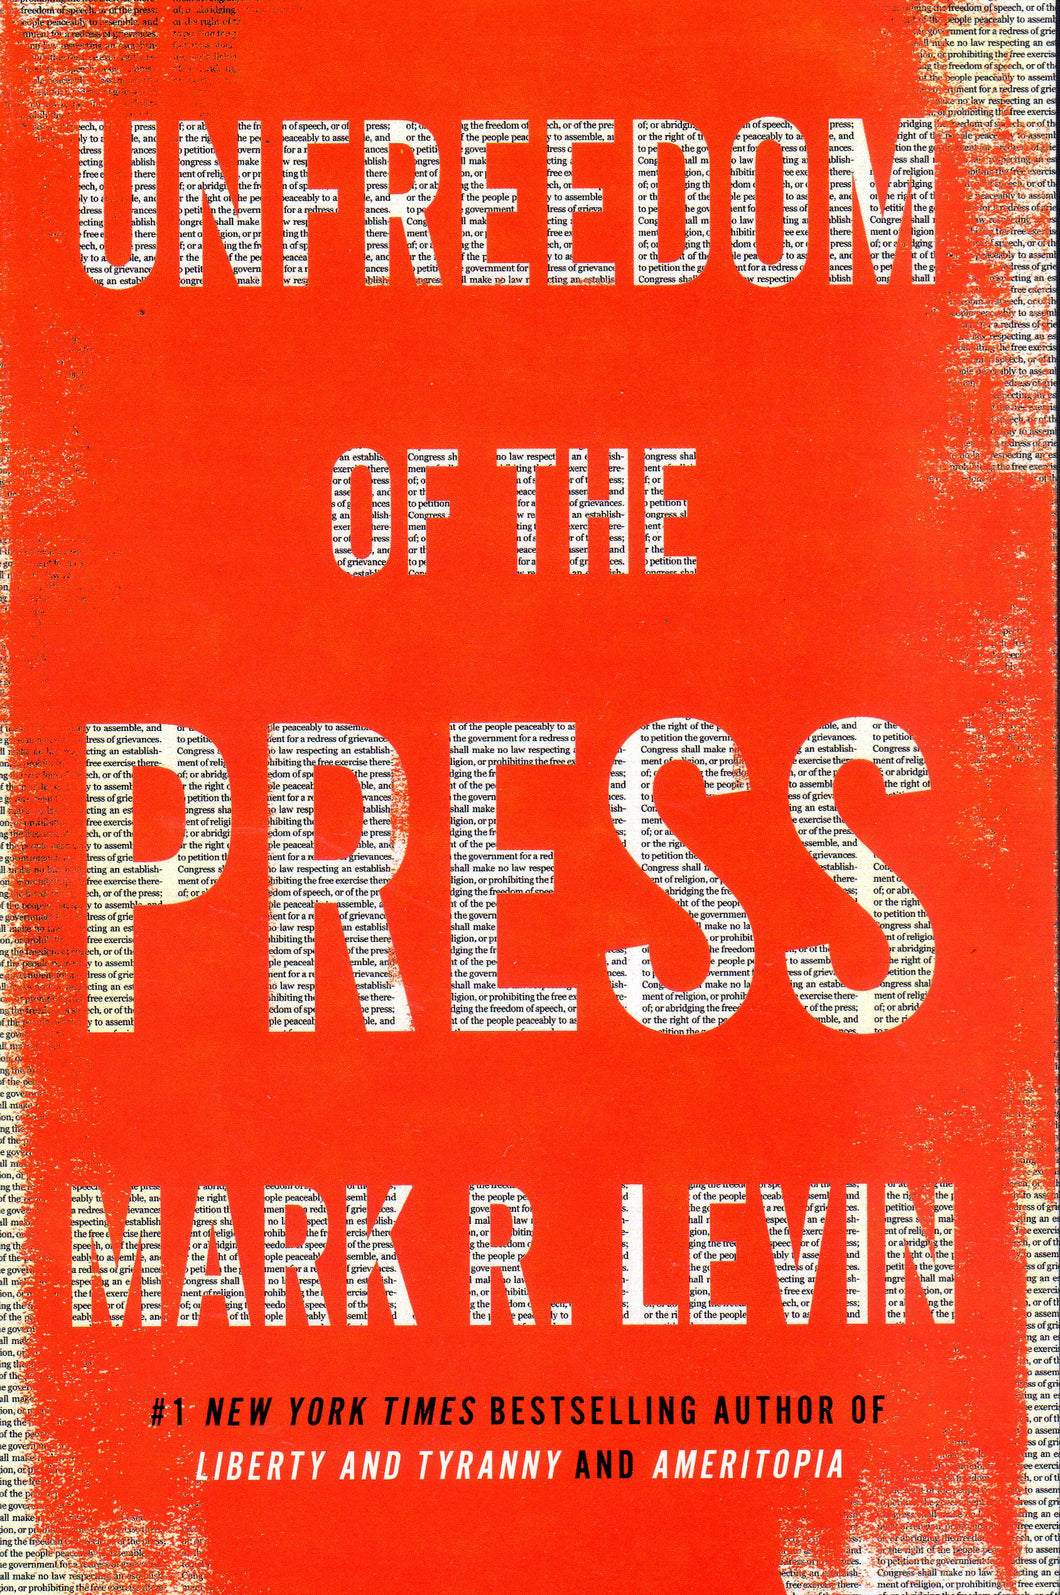 Unfreedom of the Press by Mark R. Levin (New)